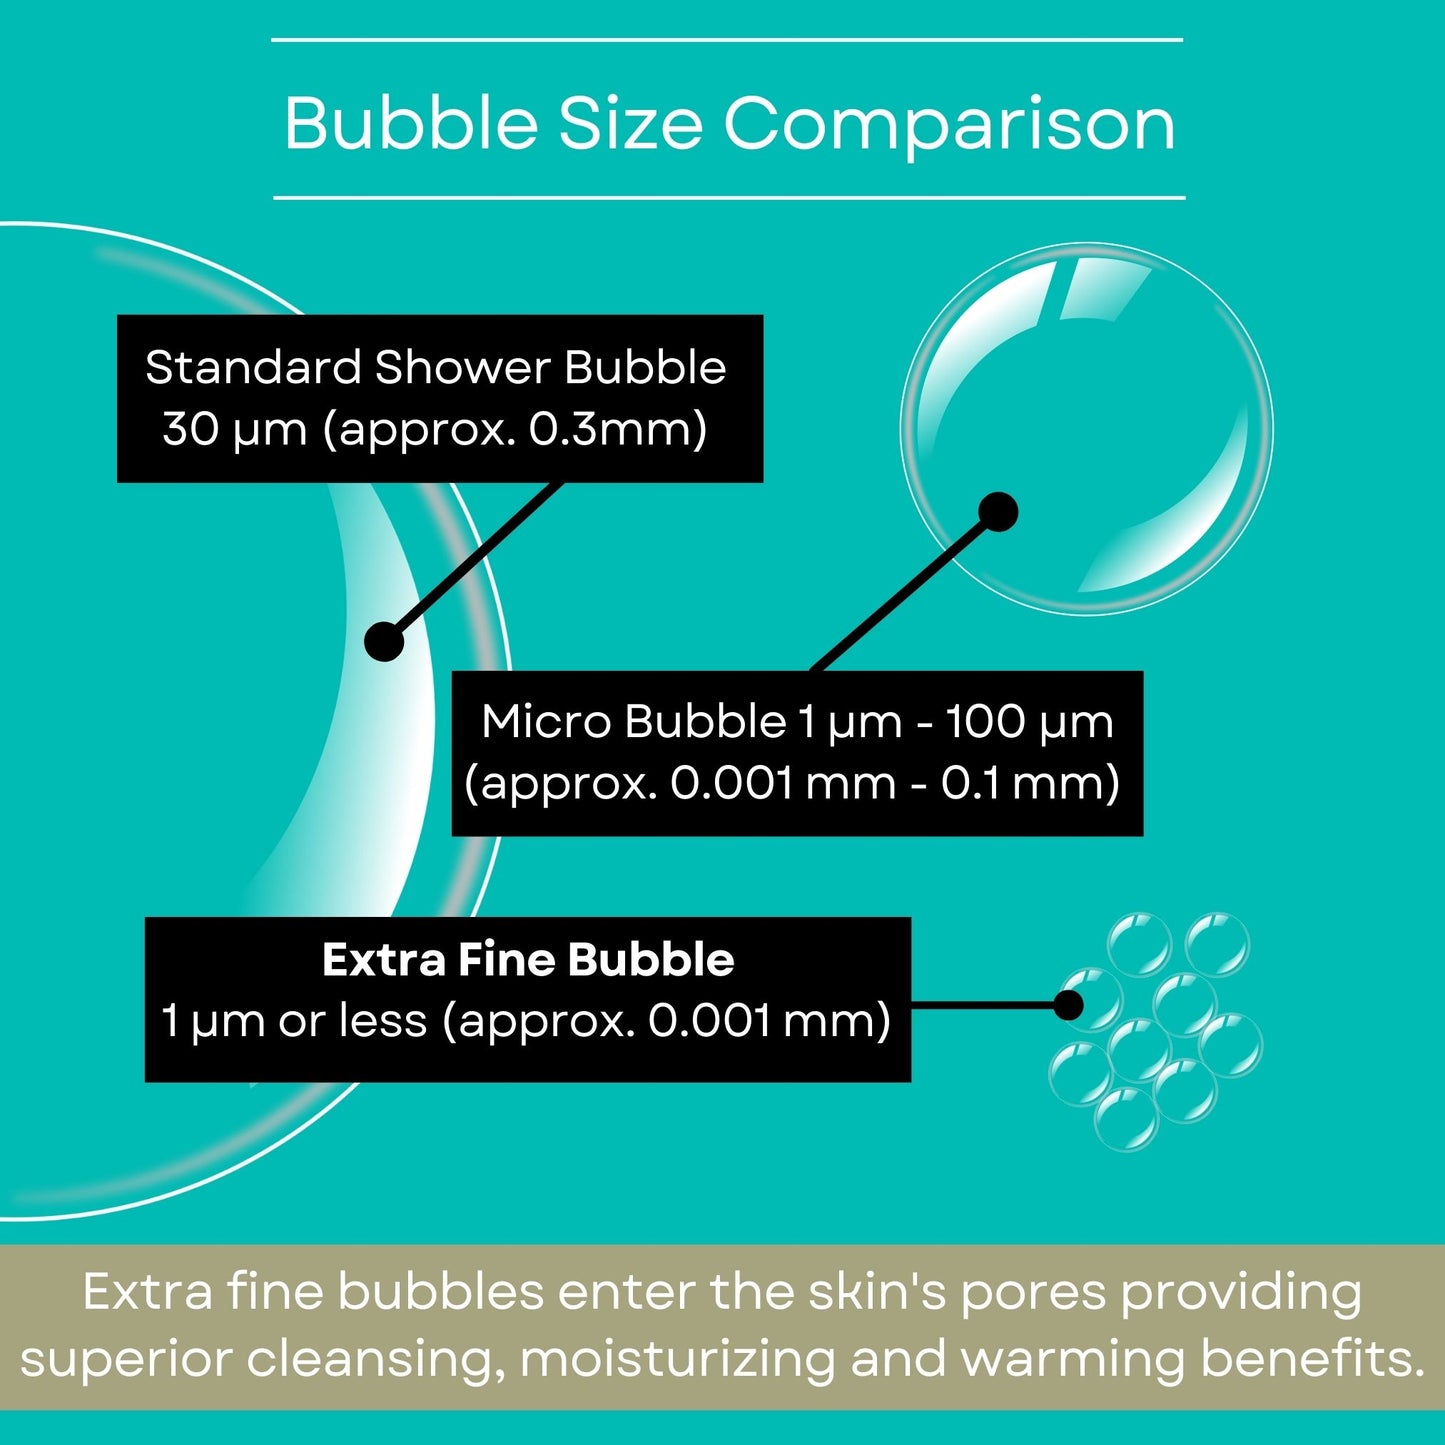 Bubble size comparison diagram comparing normal shower bubbles with extra fine bubbles with an explanation of how they enter the skin and have many cleaning benefits